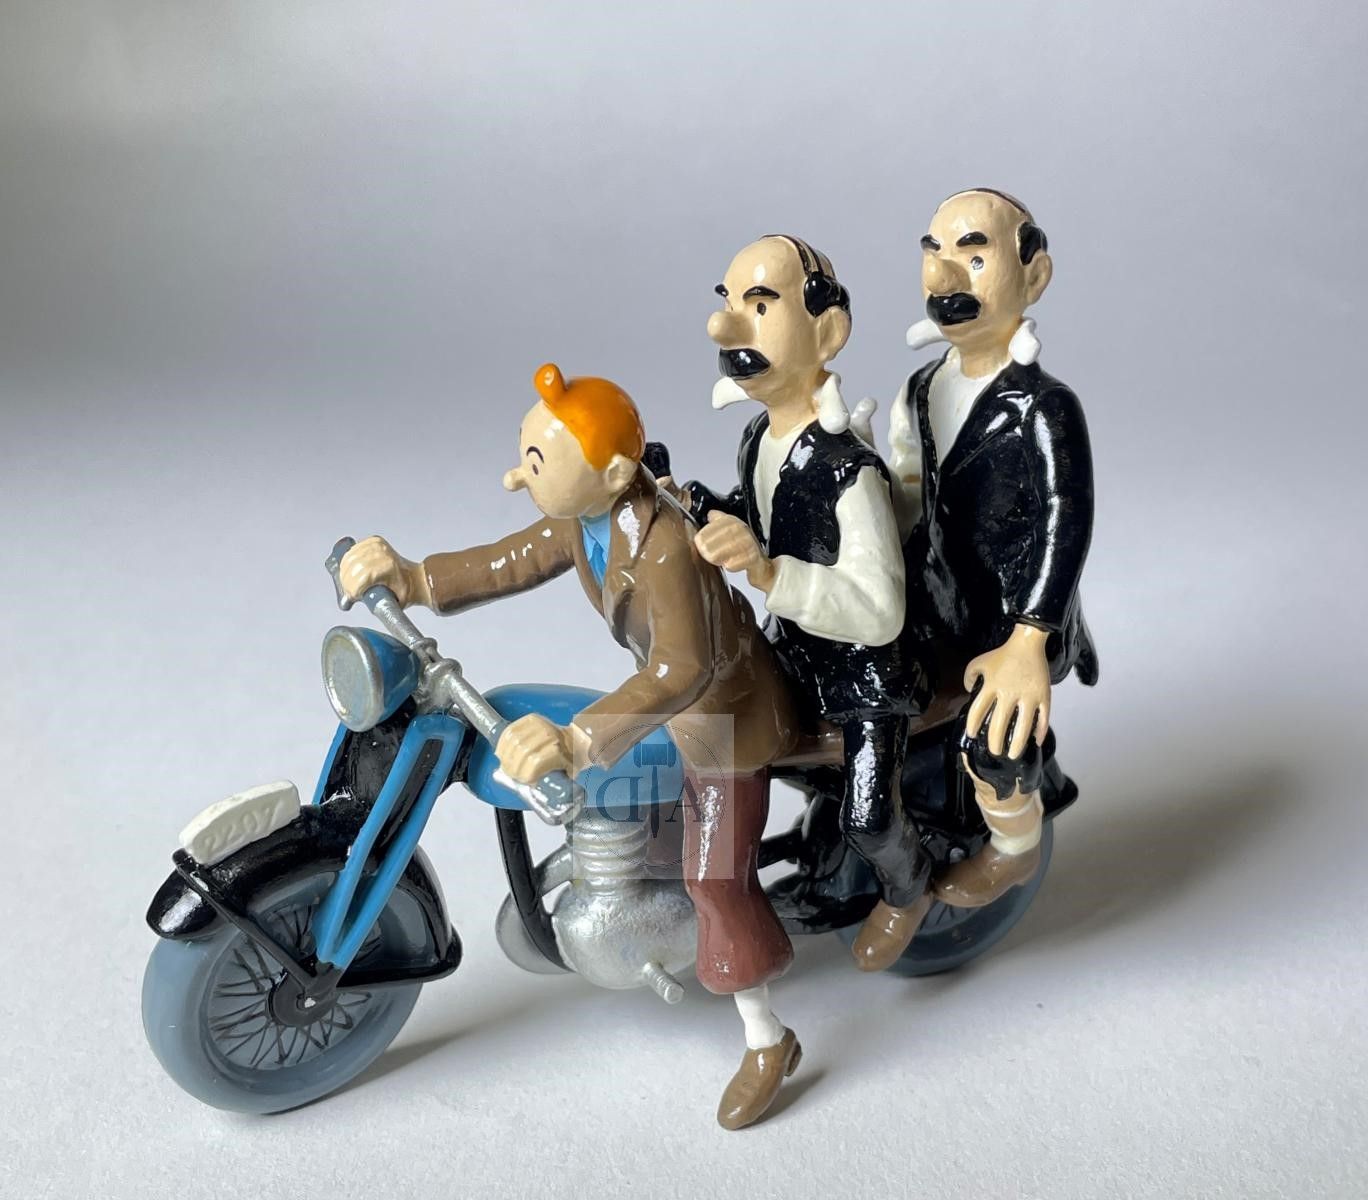 Null 
Hergé/Tintin. Ref Pixi 46940 "Tintin and the Dupondts on a motorcycle". Fr&hellip;